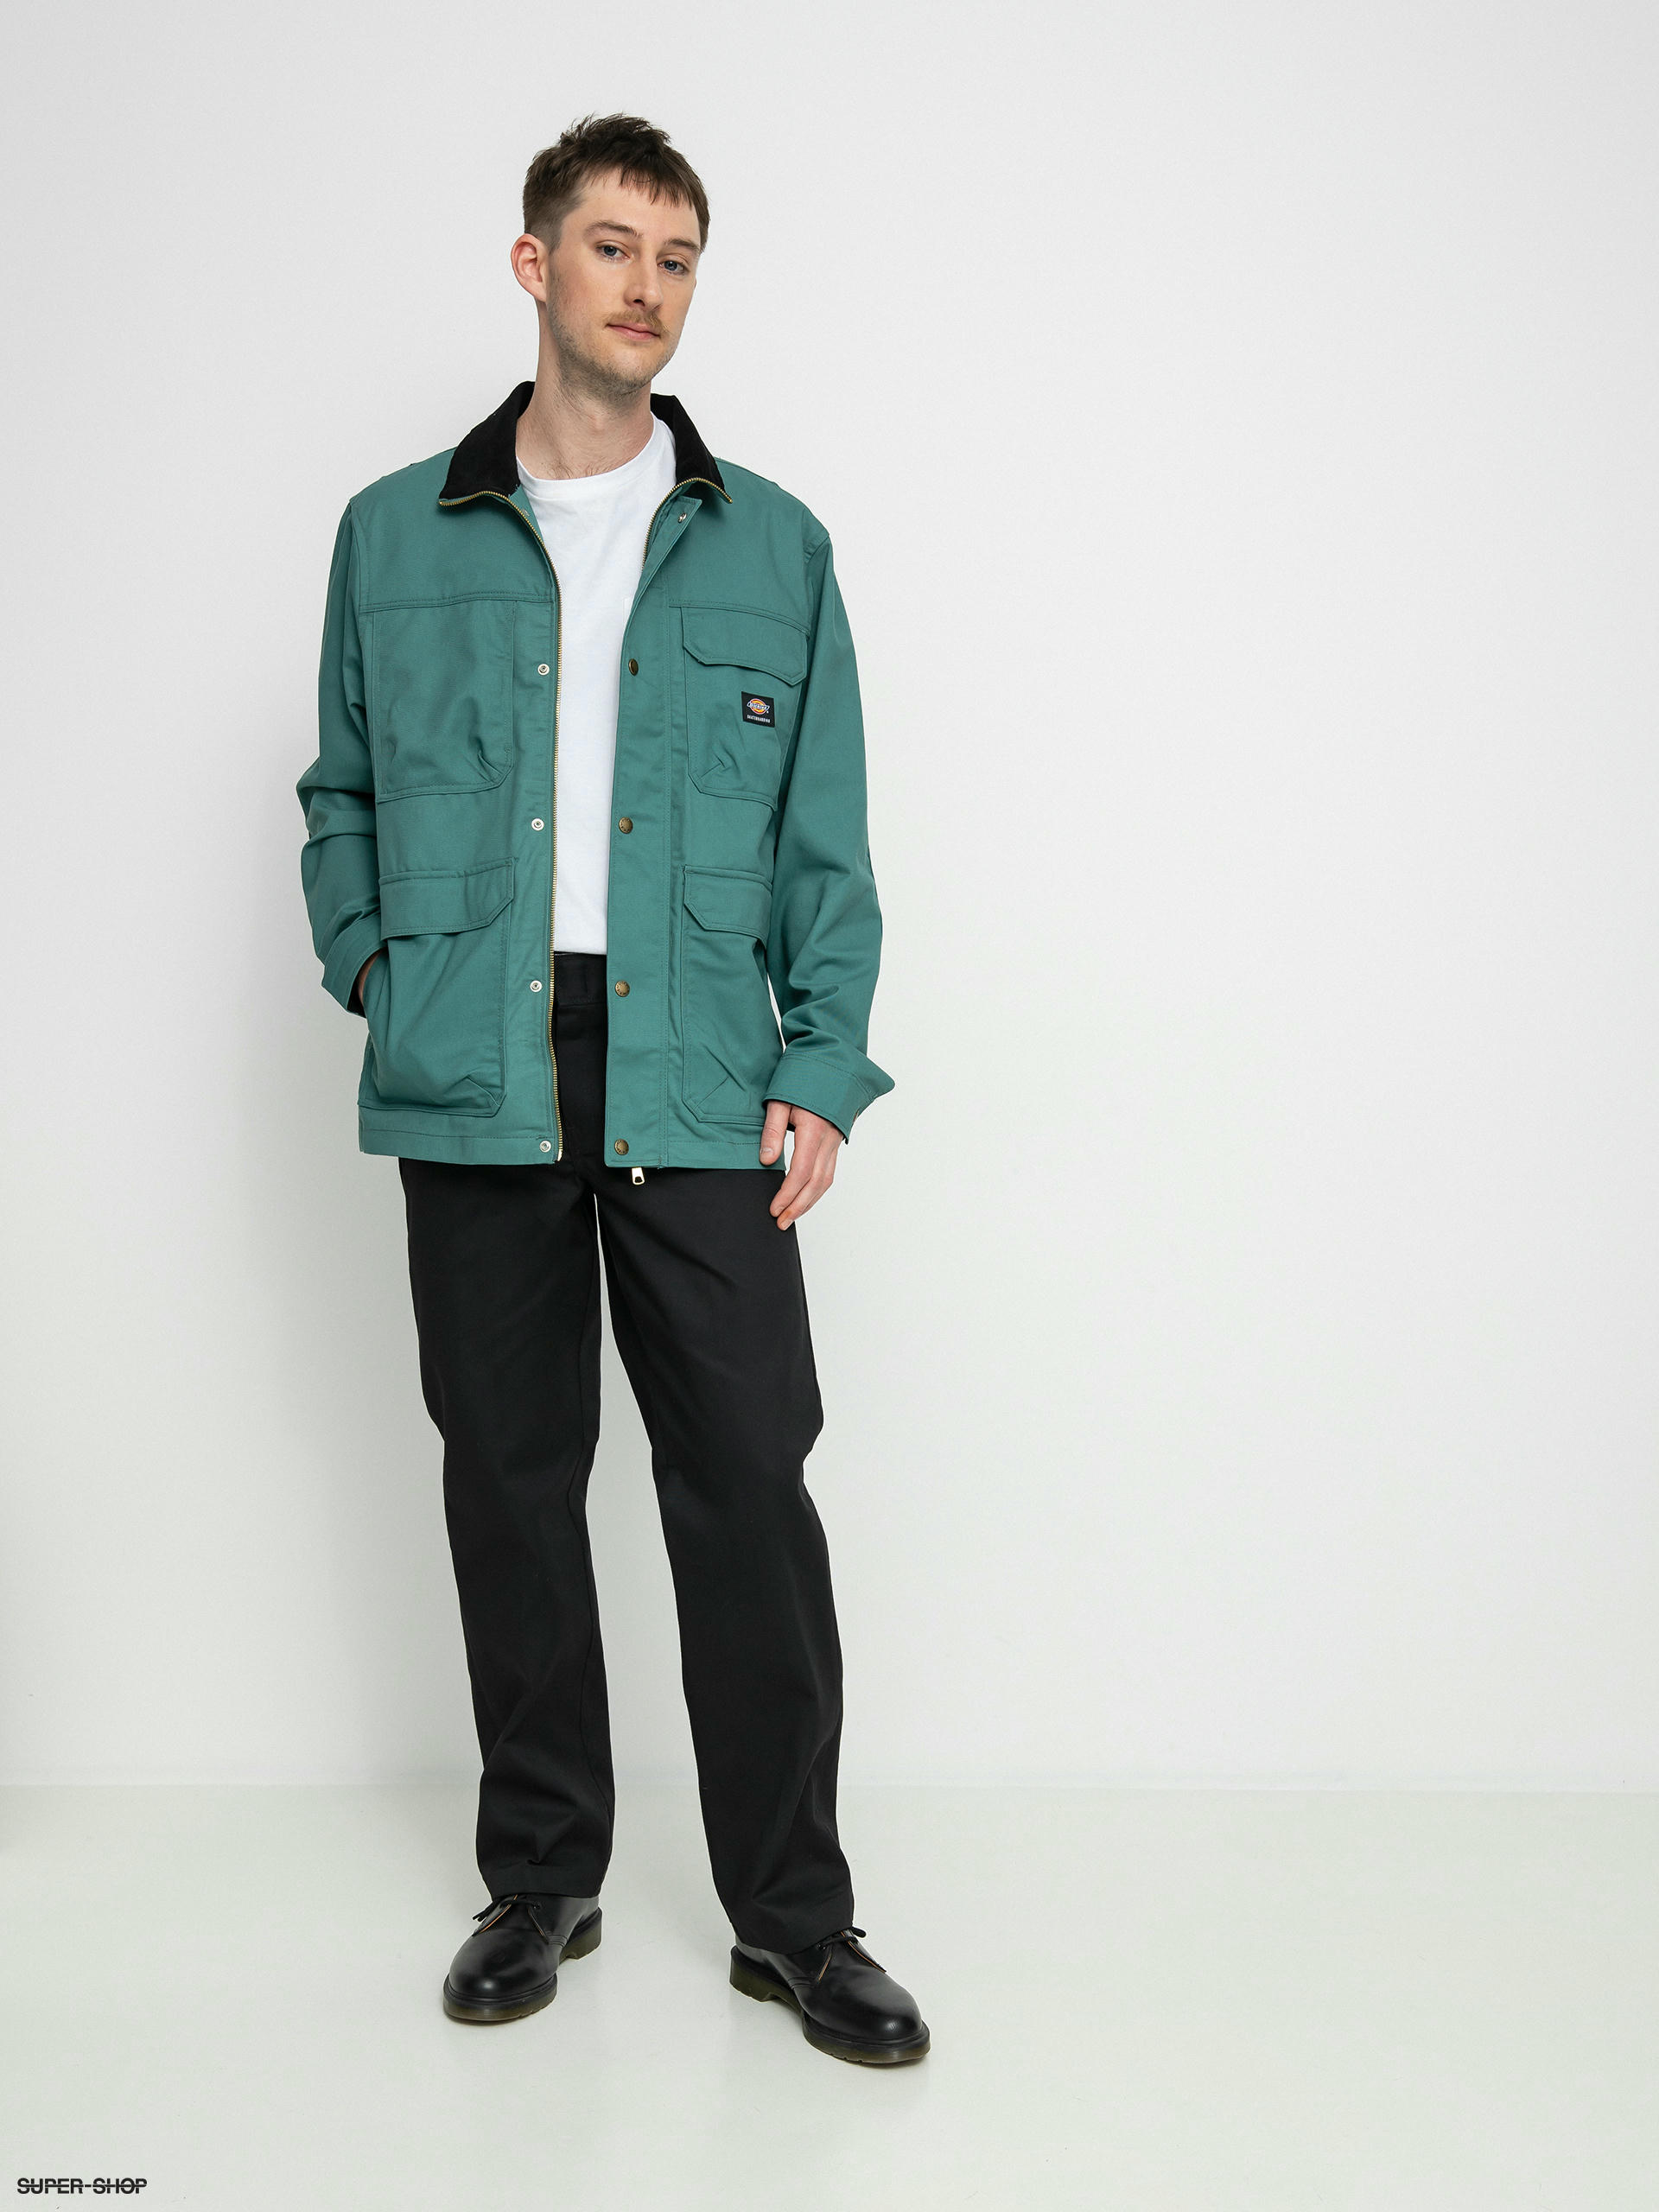 Dickies Insulated Eisenhower Jacket - Lincoln Green